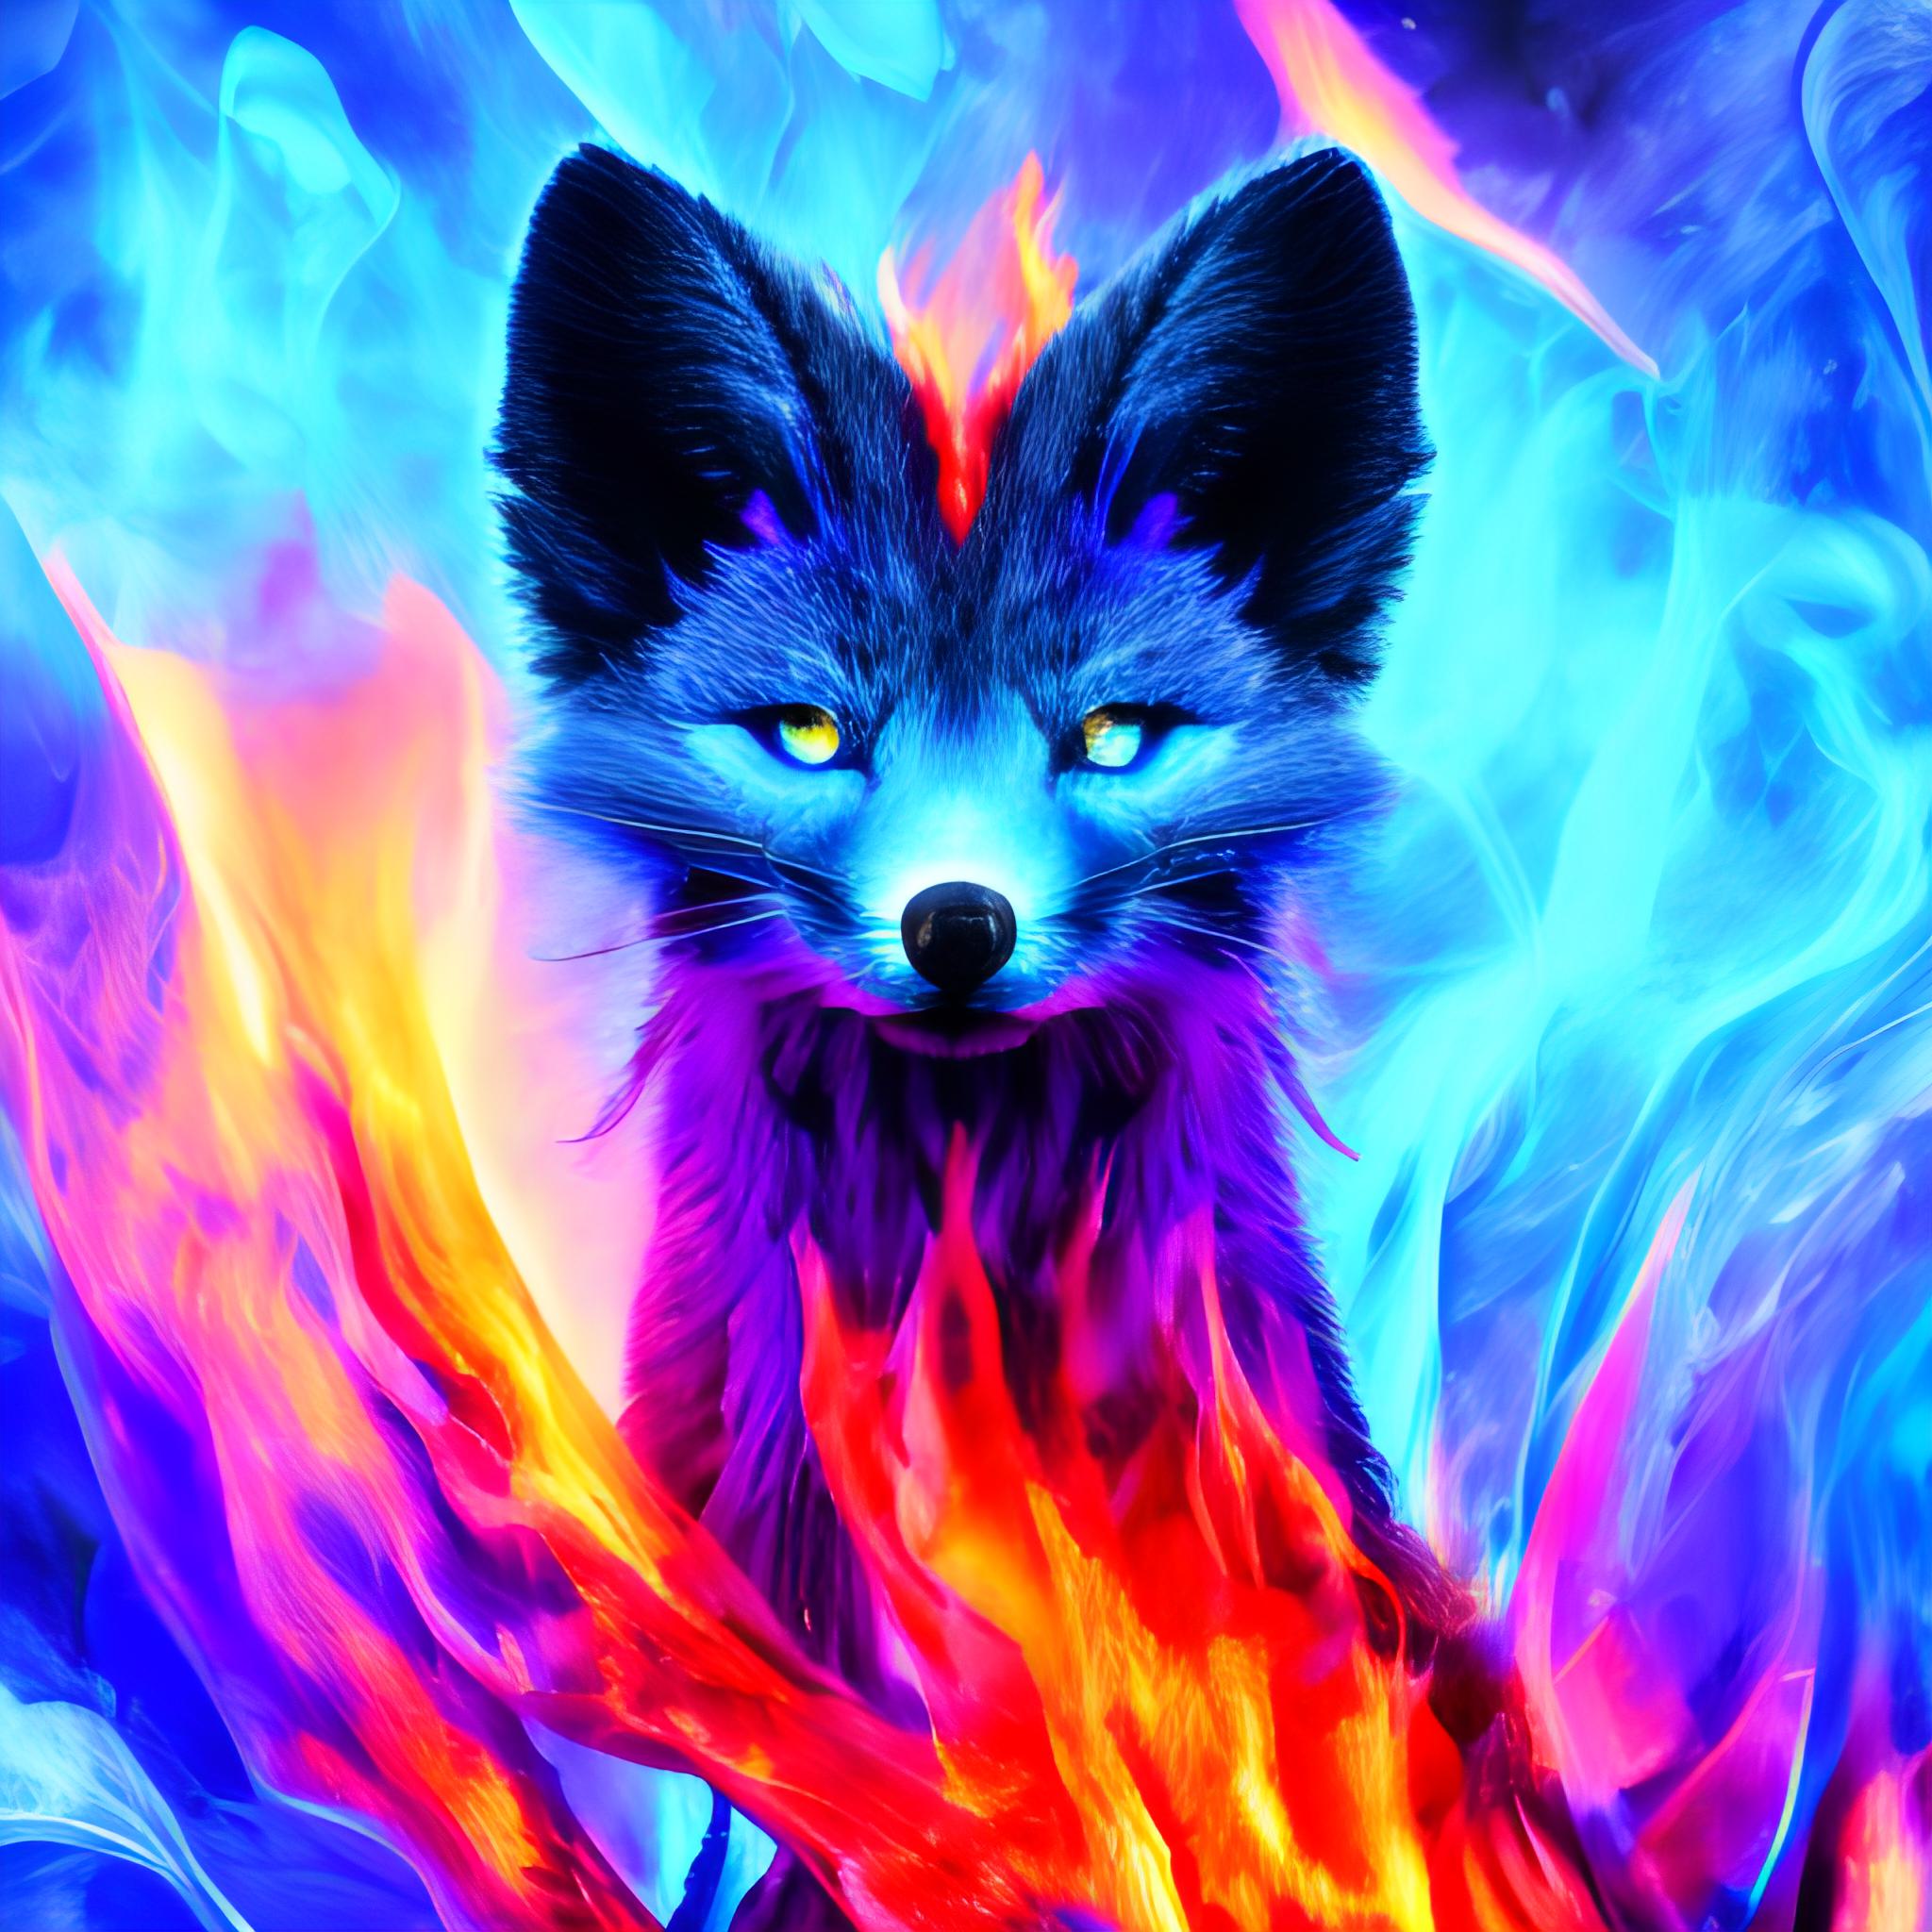 blue flame fox fire, psychedelic by GiuseppeDiRosso on DeviantArt